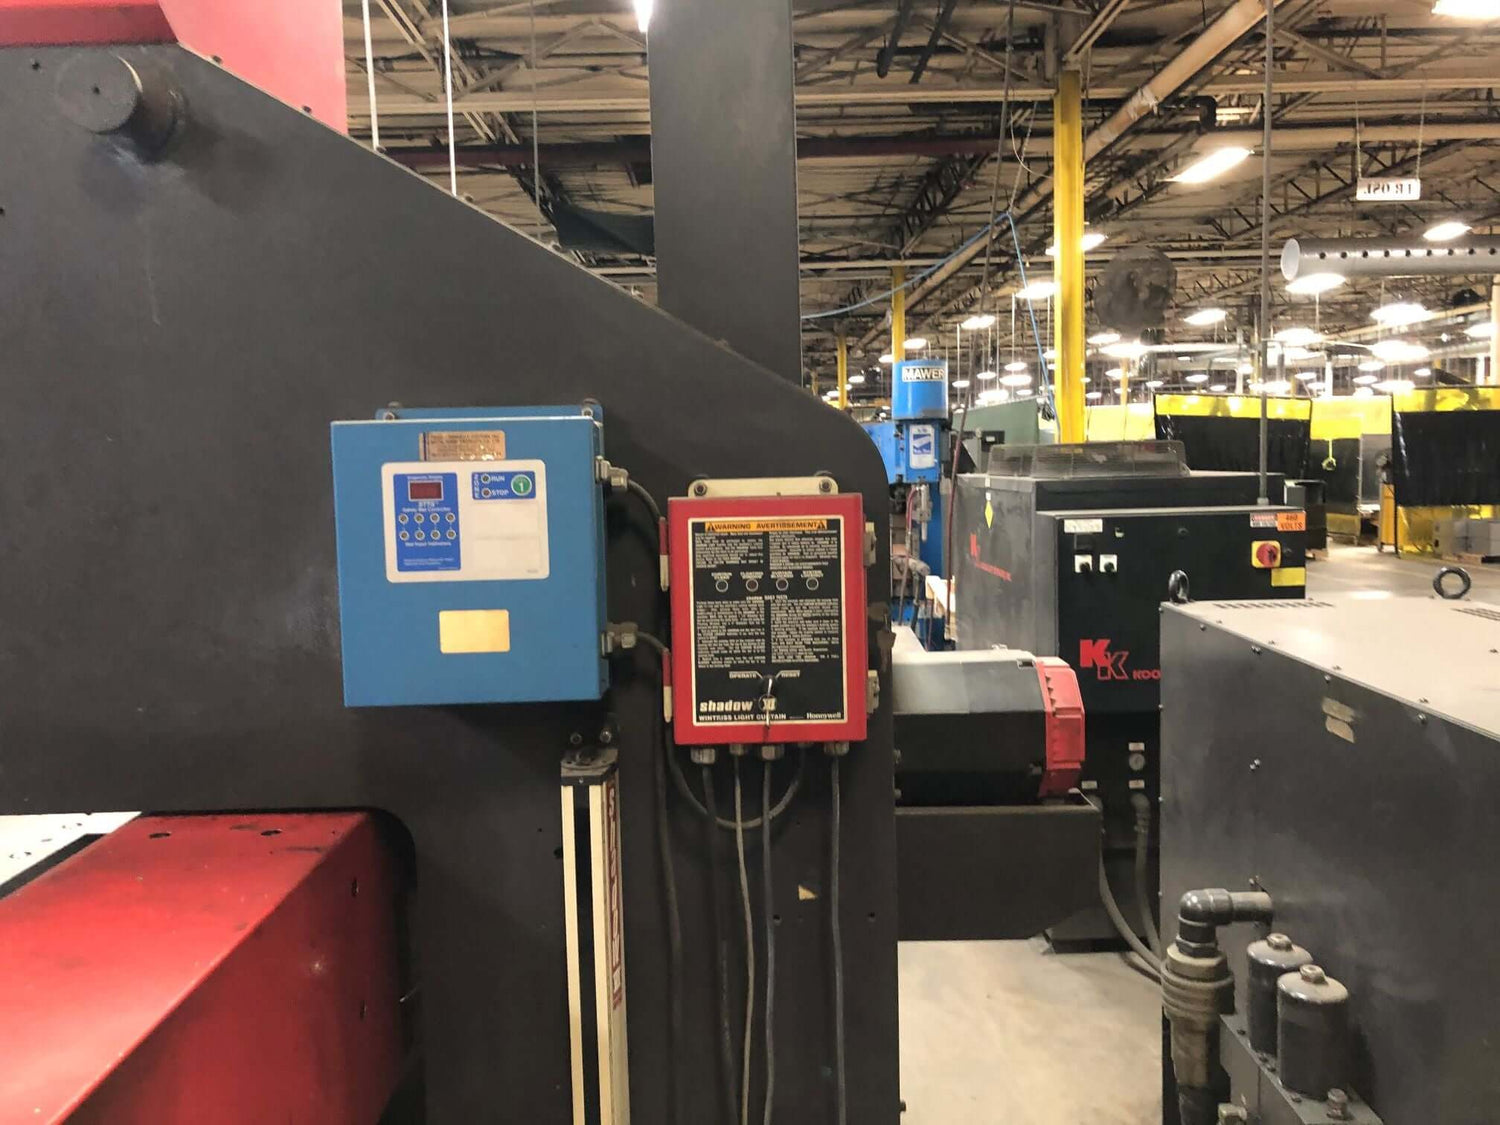 Used 33 Ton Amada Vipros 357 Queen CNC Turret Punch, Stock 1149 - Blackstone Machinery